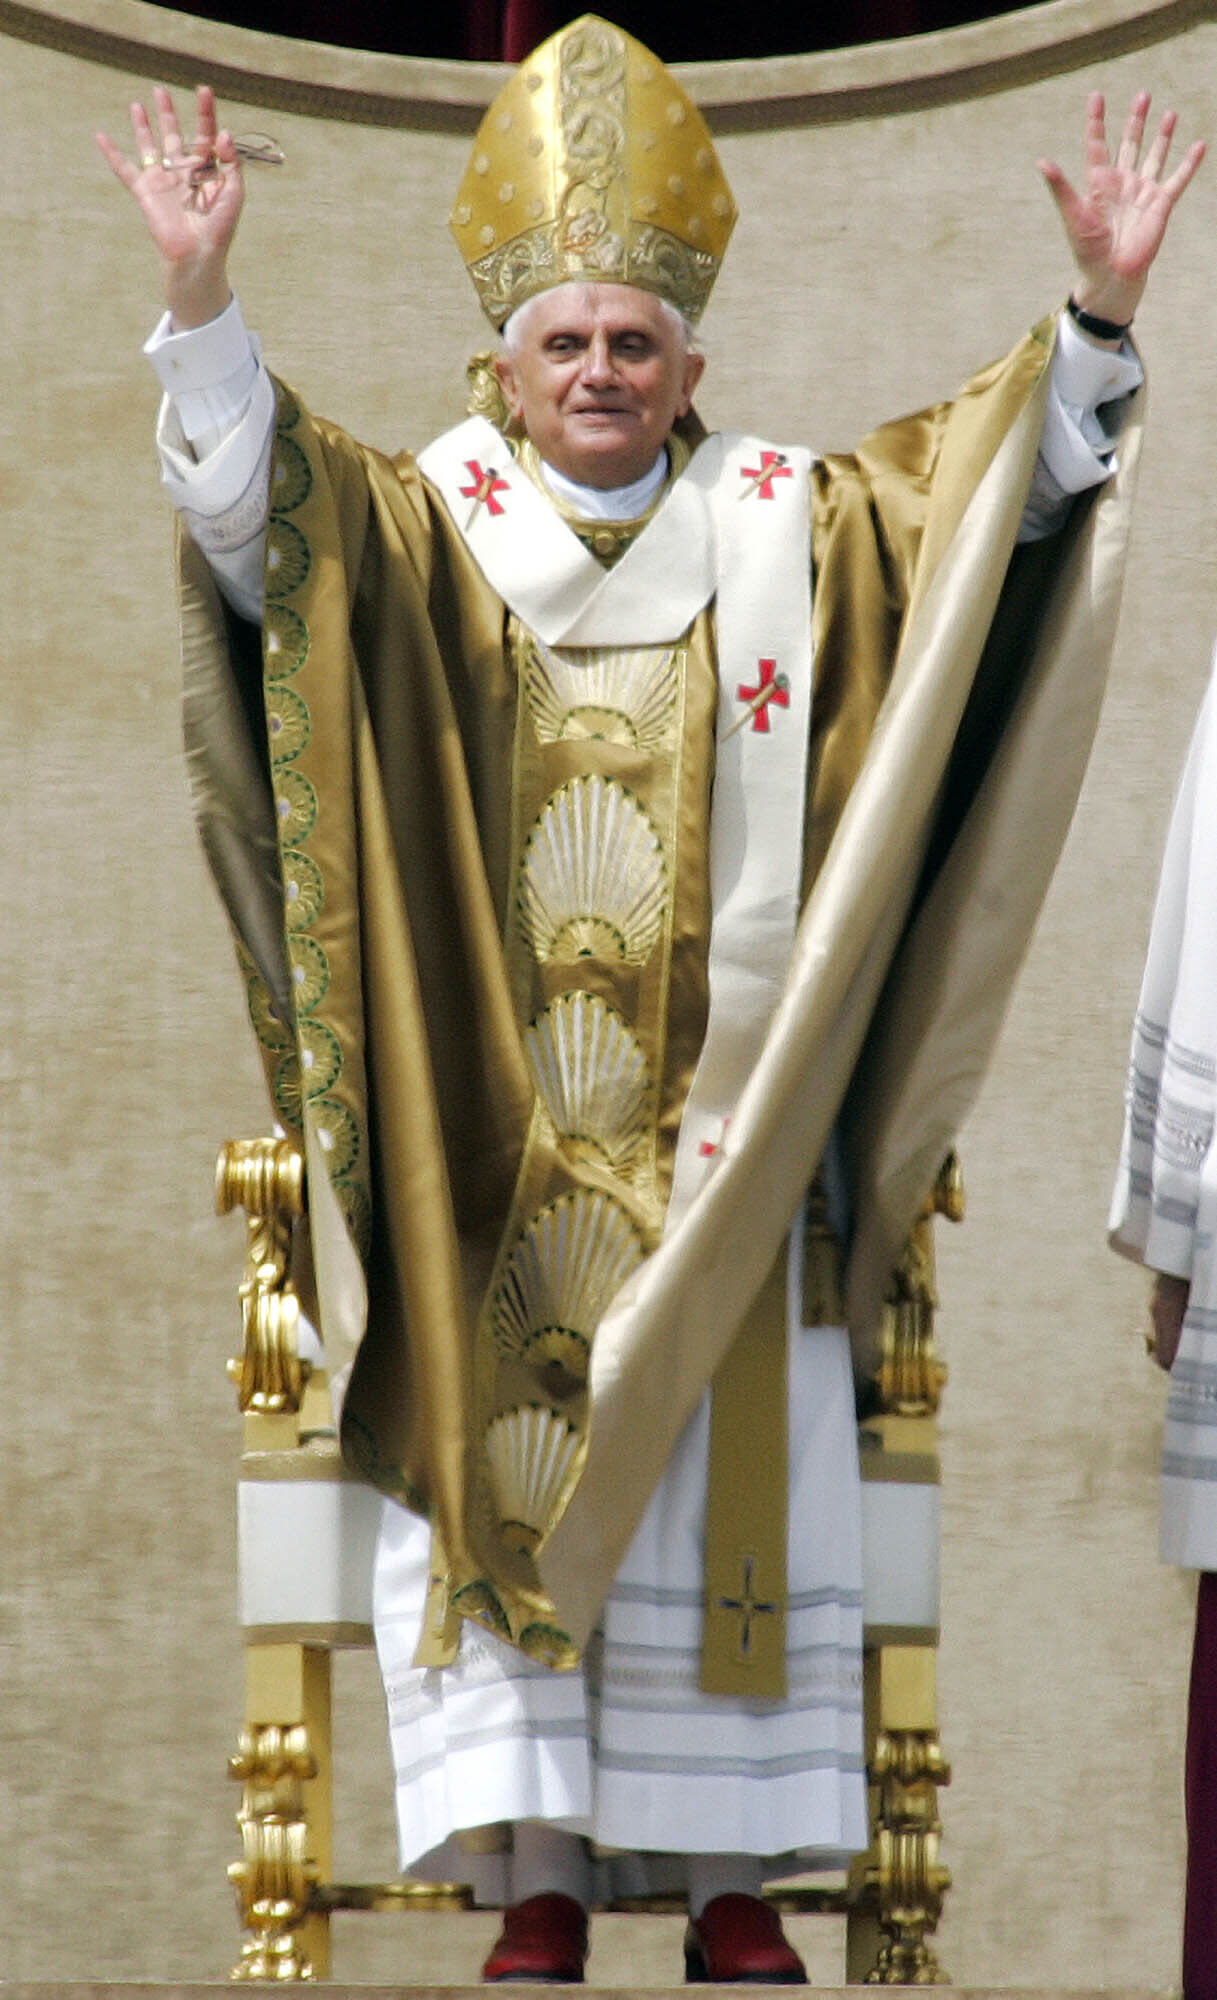 FILE - Pope Benedict XVI opens his arms as he celebrates his installment Mass in St. Peter's Square at the Vatican on April 24, 2005. Pope Emeritus Benedict XVI, the German theologian who will be remembered as the first pope in 600 years to resign, has died, the Vatican announced Saturday. He was 95. (AP Photo/Alessandra Tarantino, File)